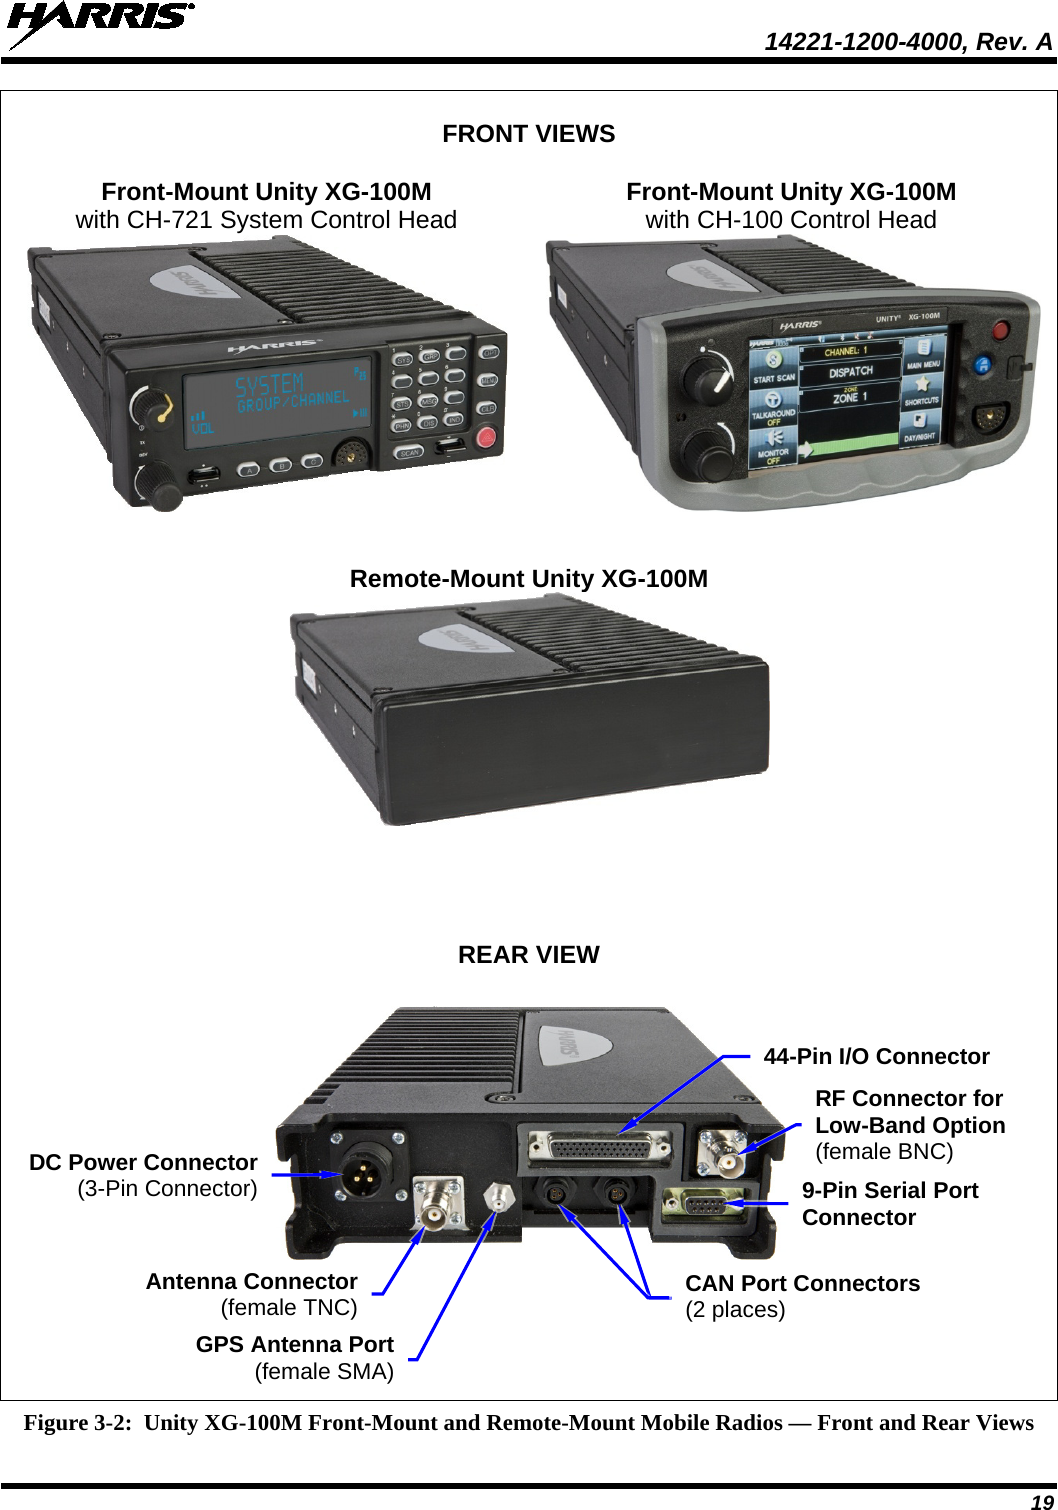  14221-1200-4000, Rev. A  19      FRONT VIEWS   Front-Mount Unity XG-100M  Front-Mount Unity XG-100M   with CH-721 System Control Head    with CH-100 Control Head              Remote-Mount Unity XG-100M              REAR VIEW       Figure 3-2:  Unity XG-100M Front-Mount and Remote-Mount Mobile Radios — Front and Rear Views CAN Port Connectors (2 places) Antenna Connector (female TNC) DC Power Connector (3-Pin Connector) GPS Antenna Port (female SMA) 44-Pin I/O Connector 9-Pin Serial Port Connector RF Connector for Low-Band Option (female BNC)  